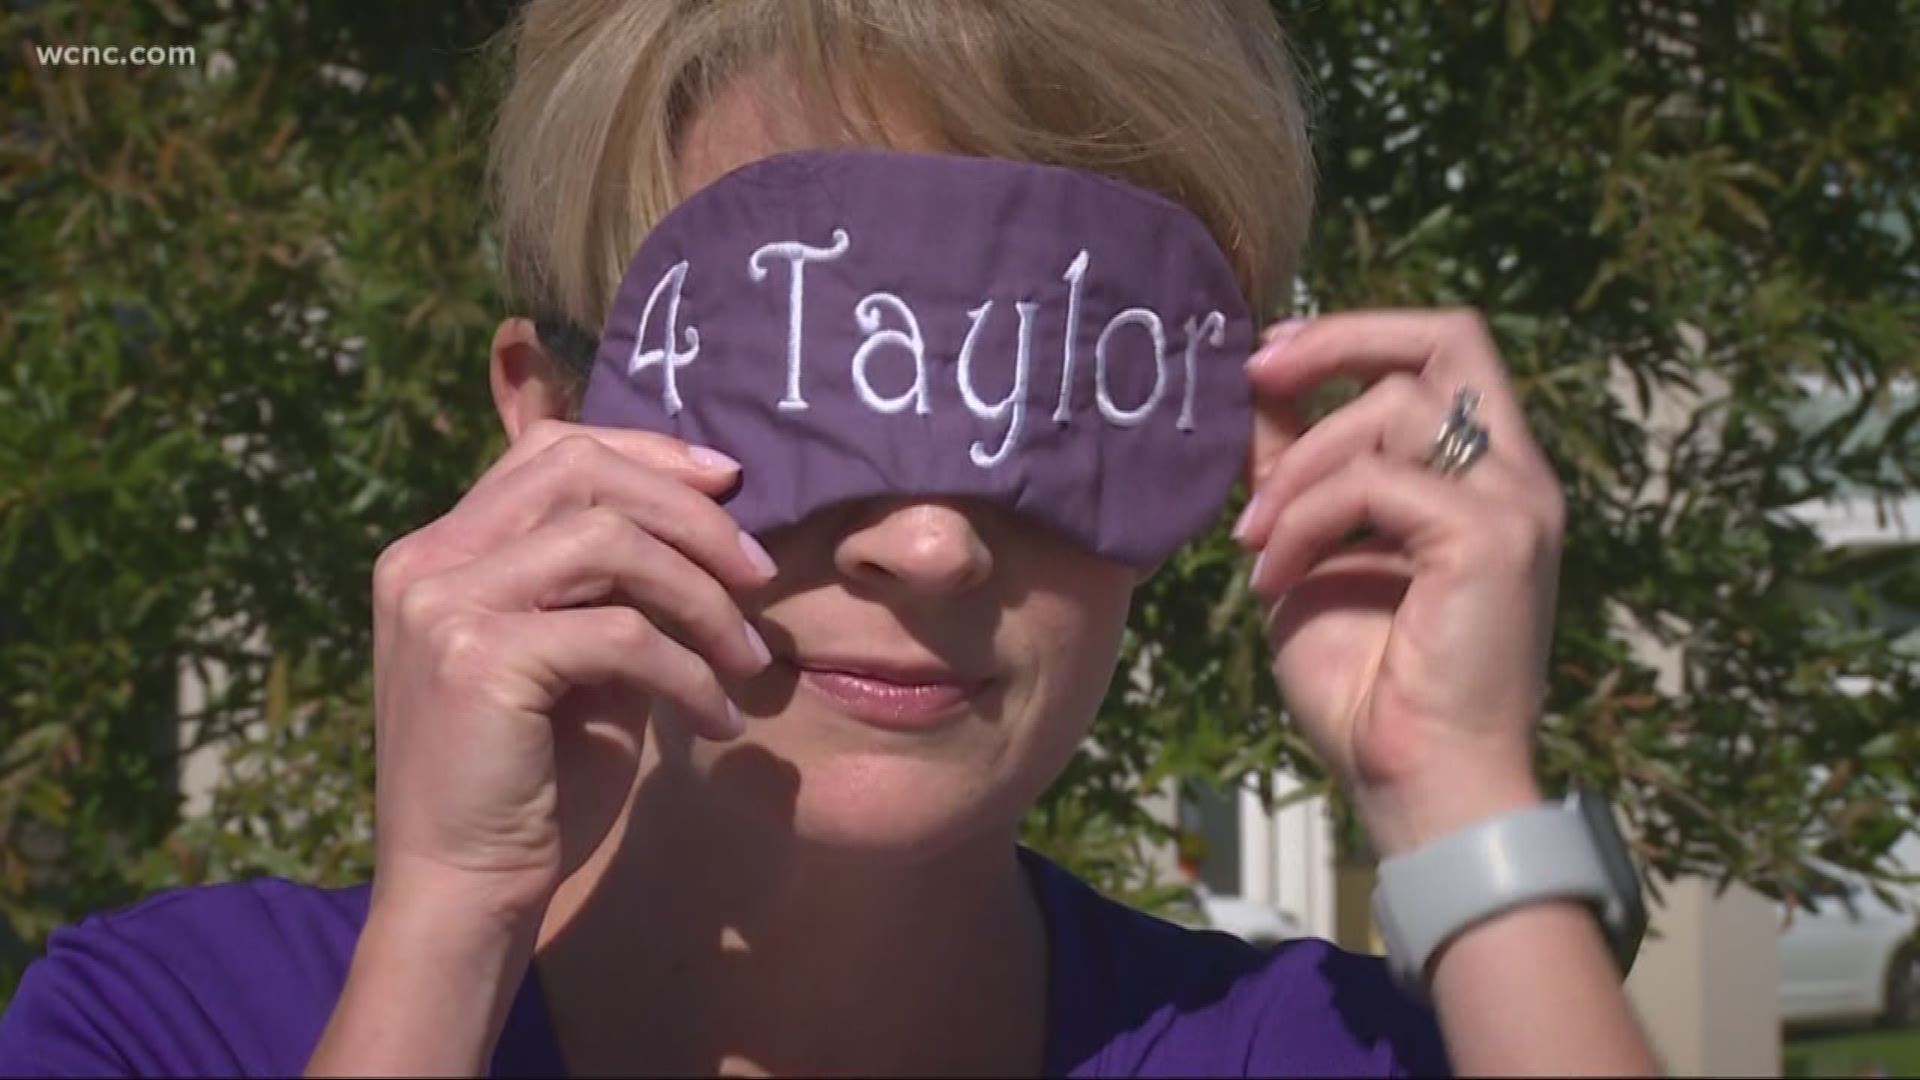 A Charlotte woman is going to run half of the Charlotte Marathon blindfolded to honor her sister who battled a rare condition.